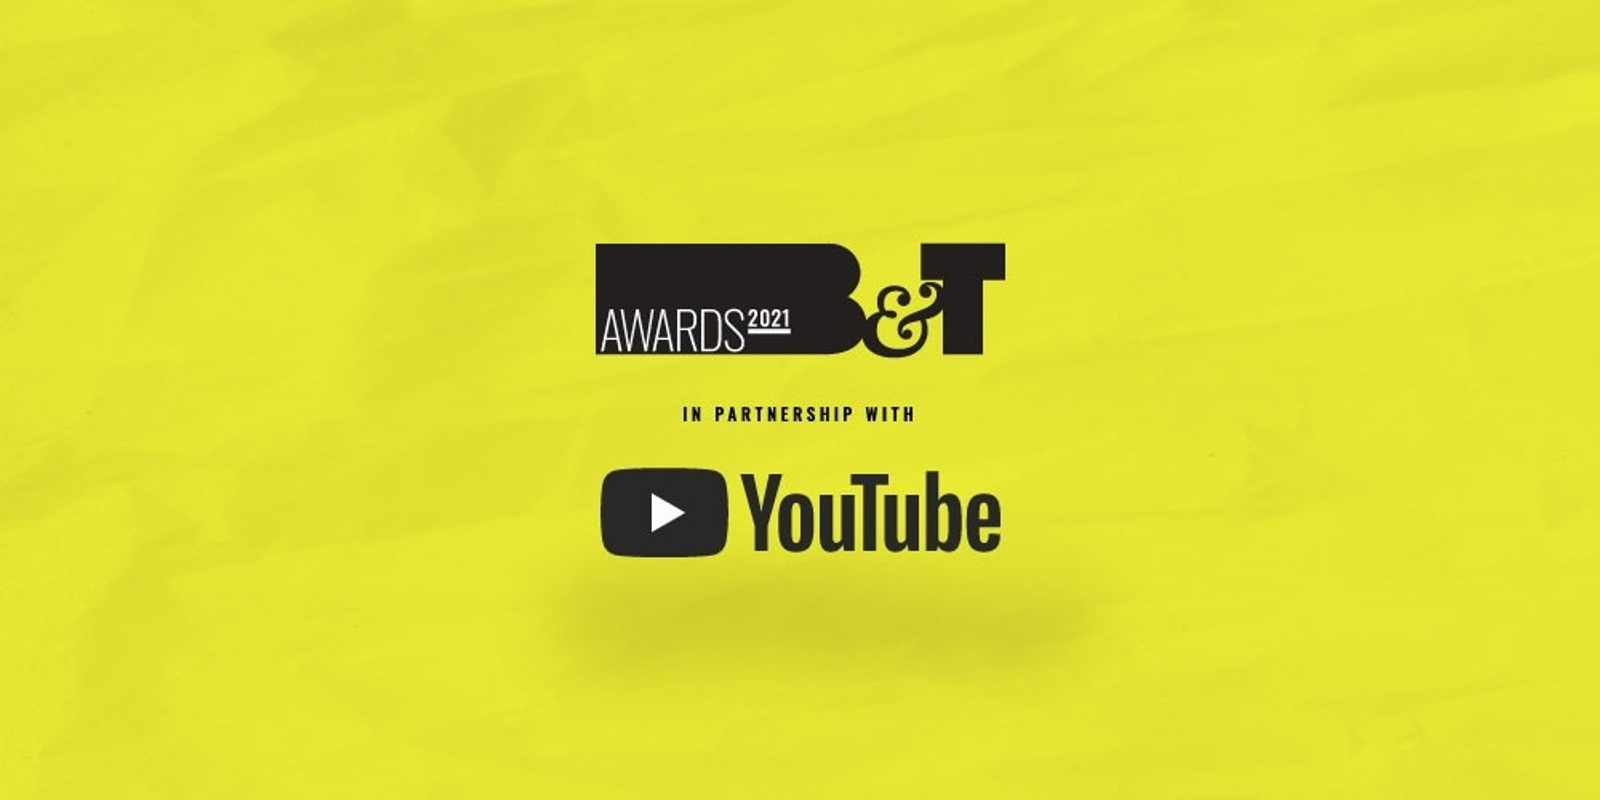 Banner image for B&T Awards 2021, in partnership with YouTube